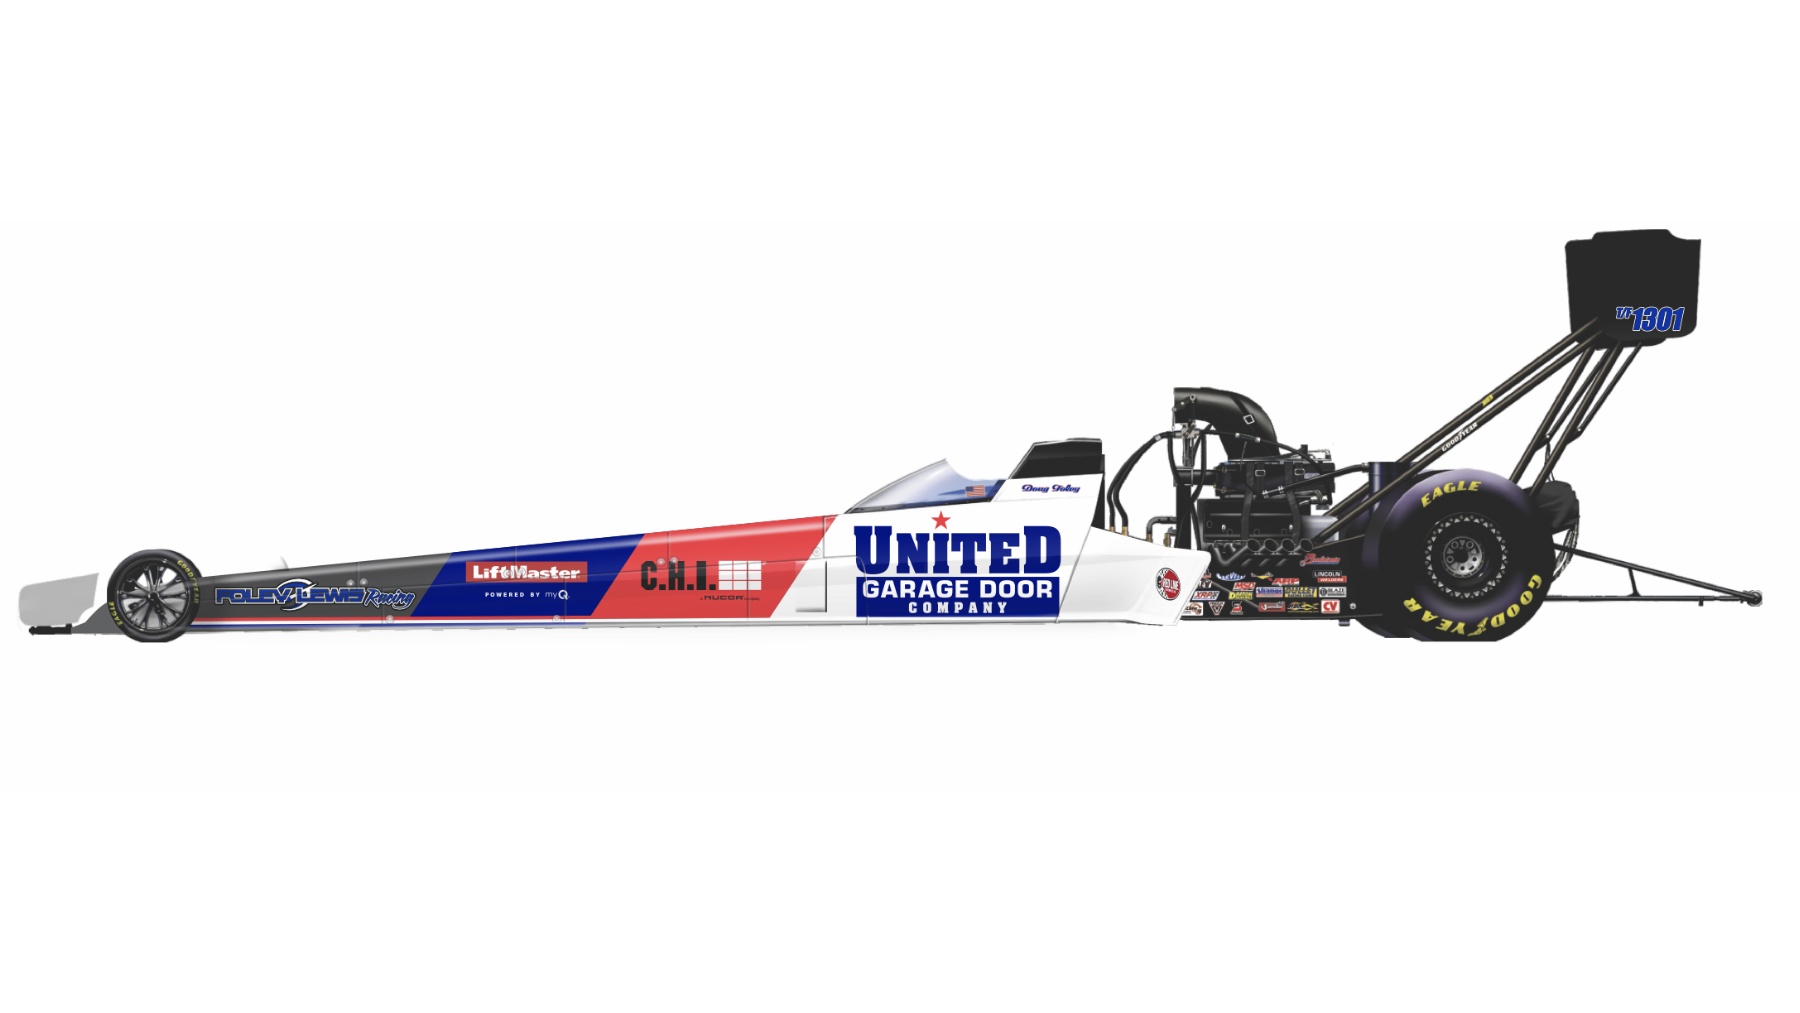 Doug Foley Races at NHRA Route 66 Nationals with United Garage Door Sponsorship